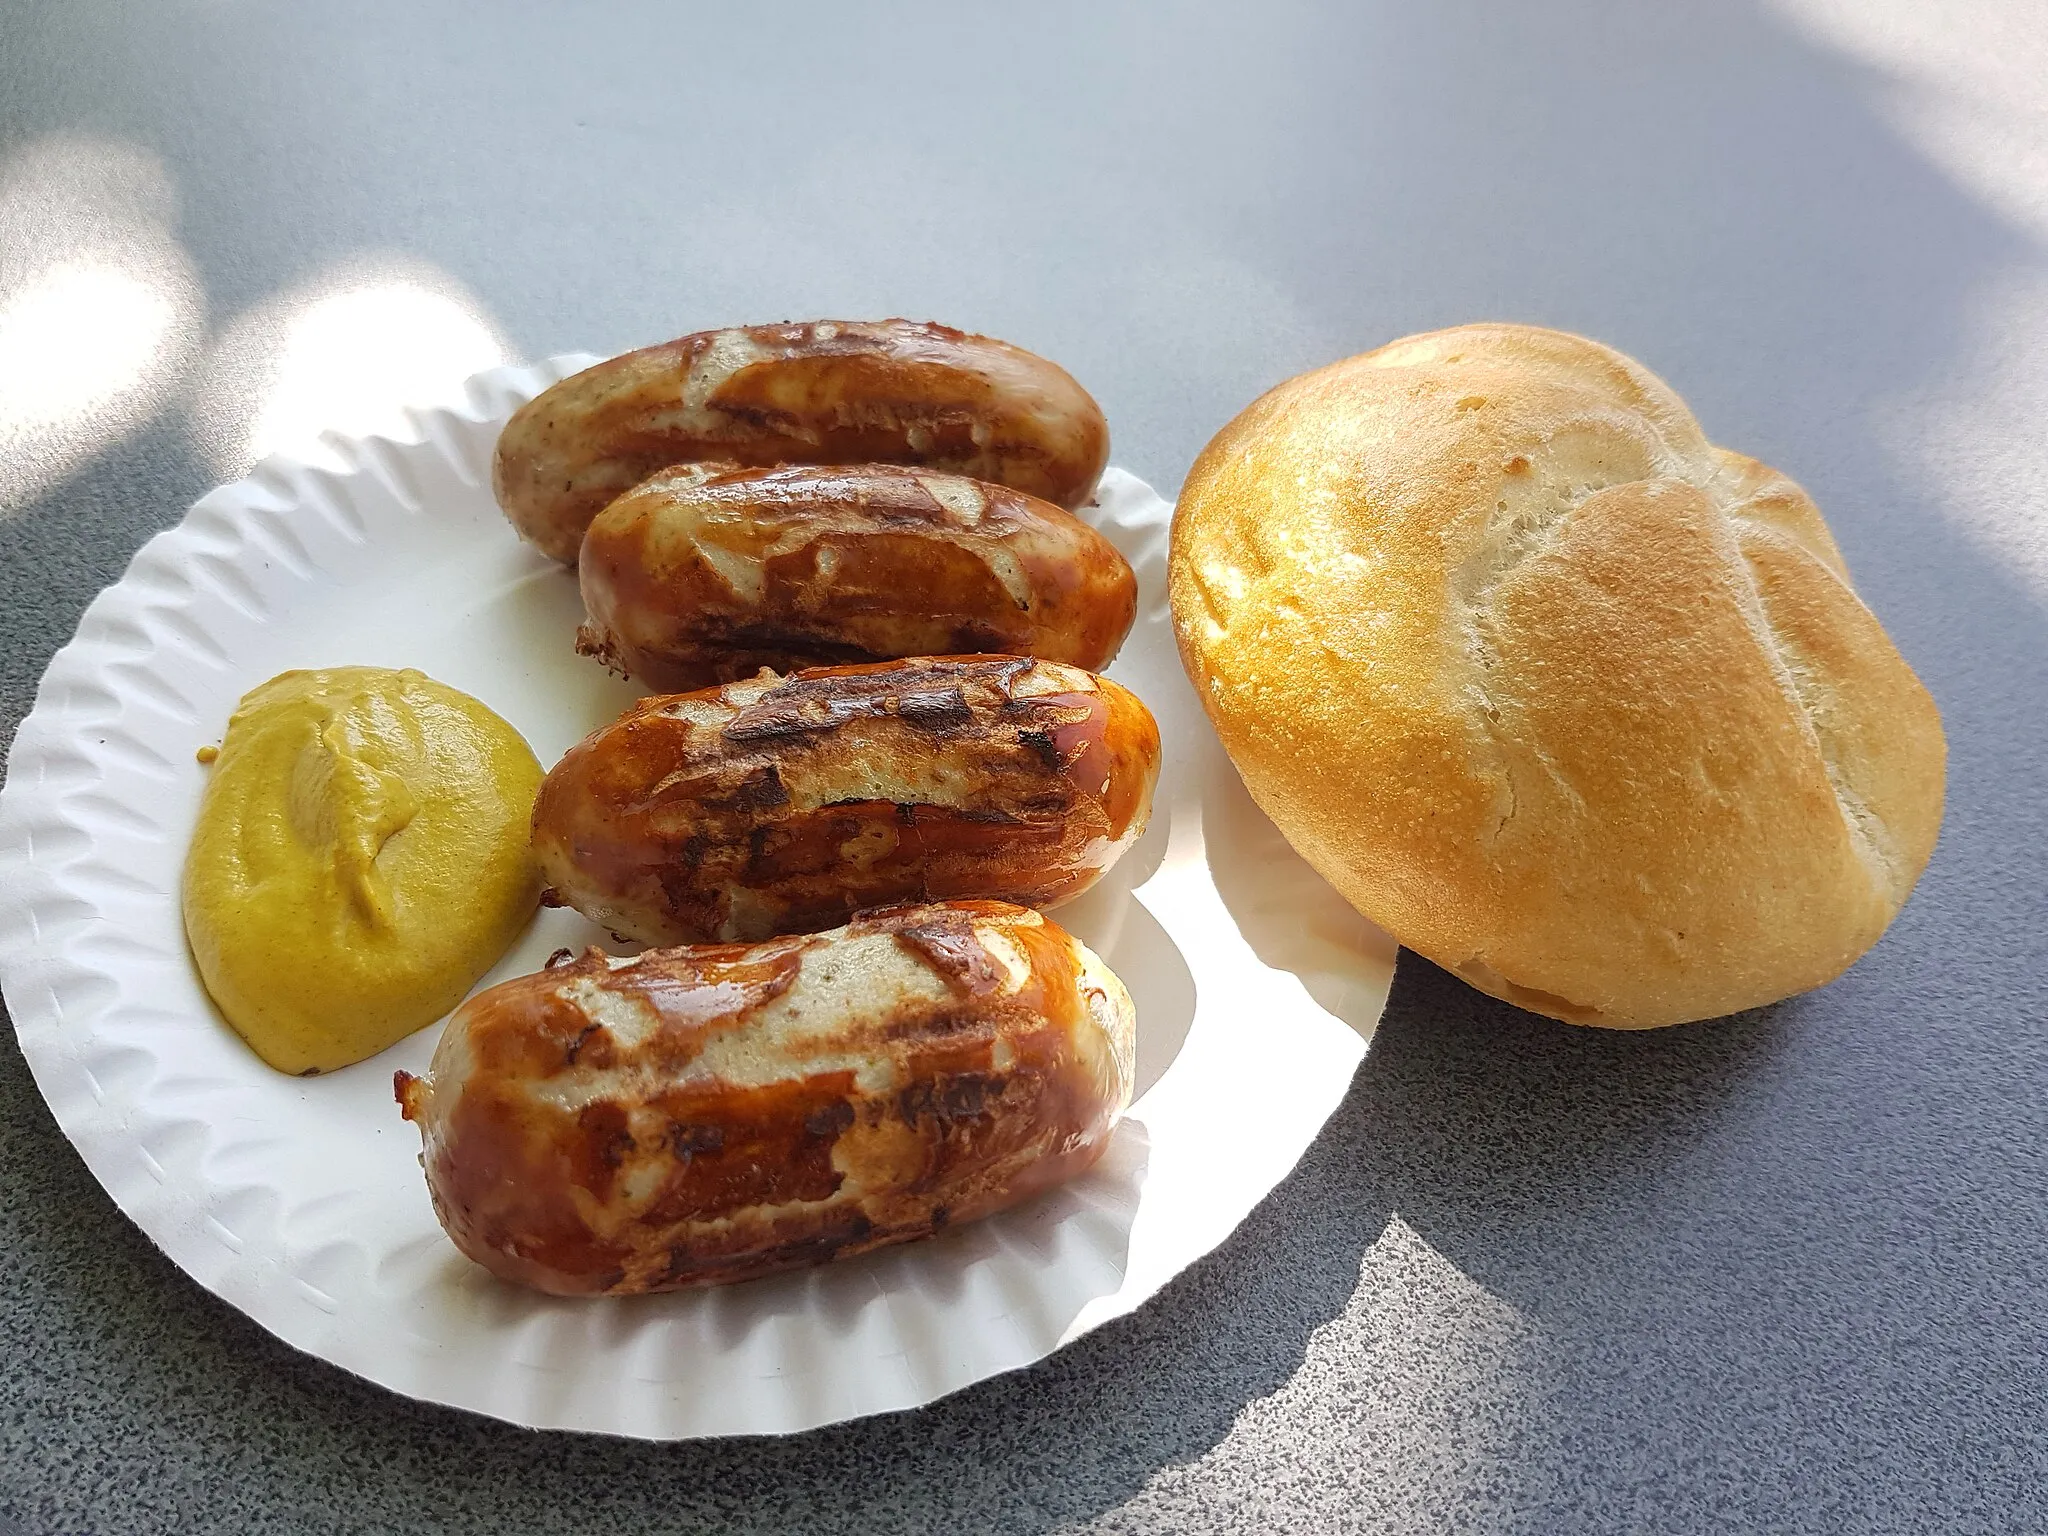 Photo showing: Original Brunner's sausages from the Brunner butchery in Landshut. The sausages are sold at snack stands in and around Landshut. They are grilled on charcoal and eaten with mustard and bread rolls or pretzels. One usually orders one pair, or 2 pairs of sausages. Photographed at a sausage stand in Ergolding opposite the town hall.